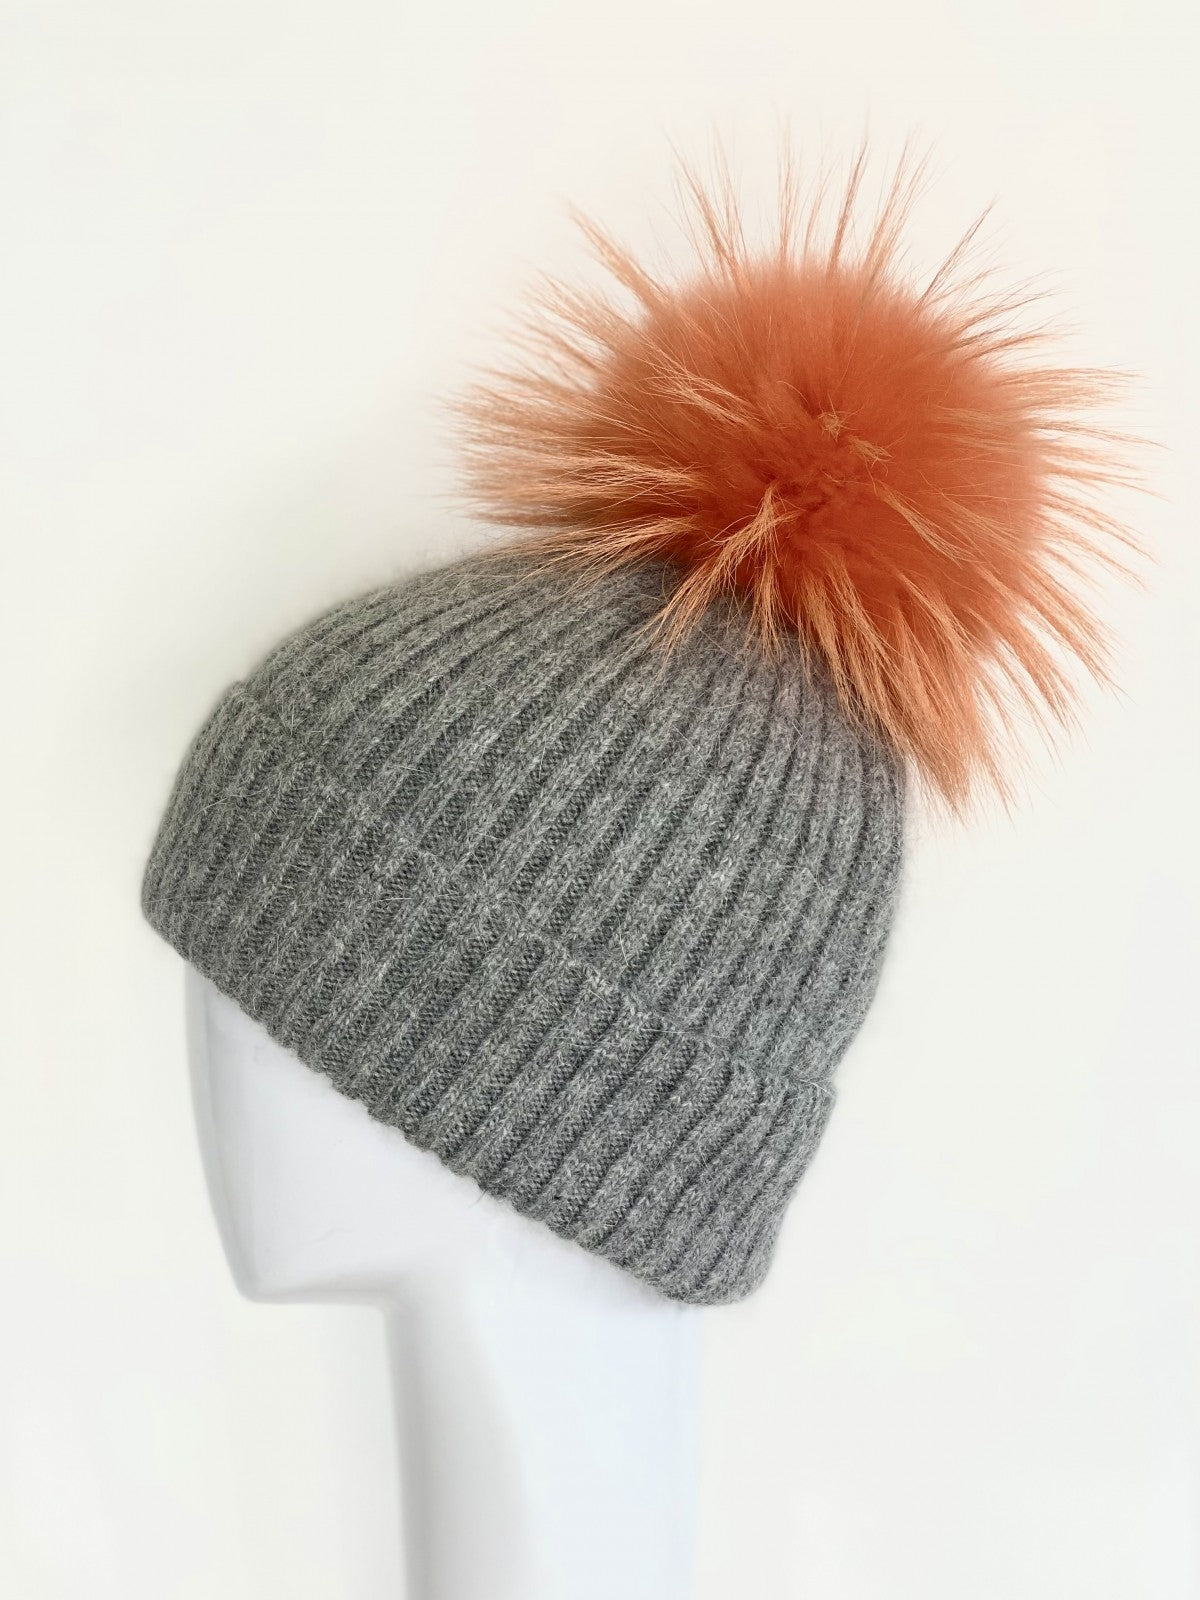 Angora/Wool Blend Hat in Apricot is